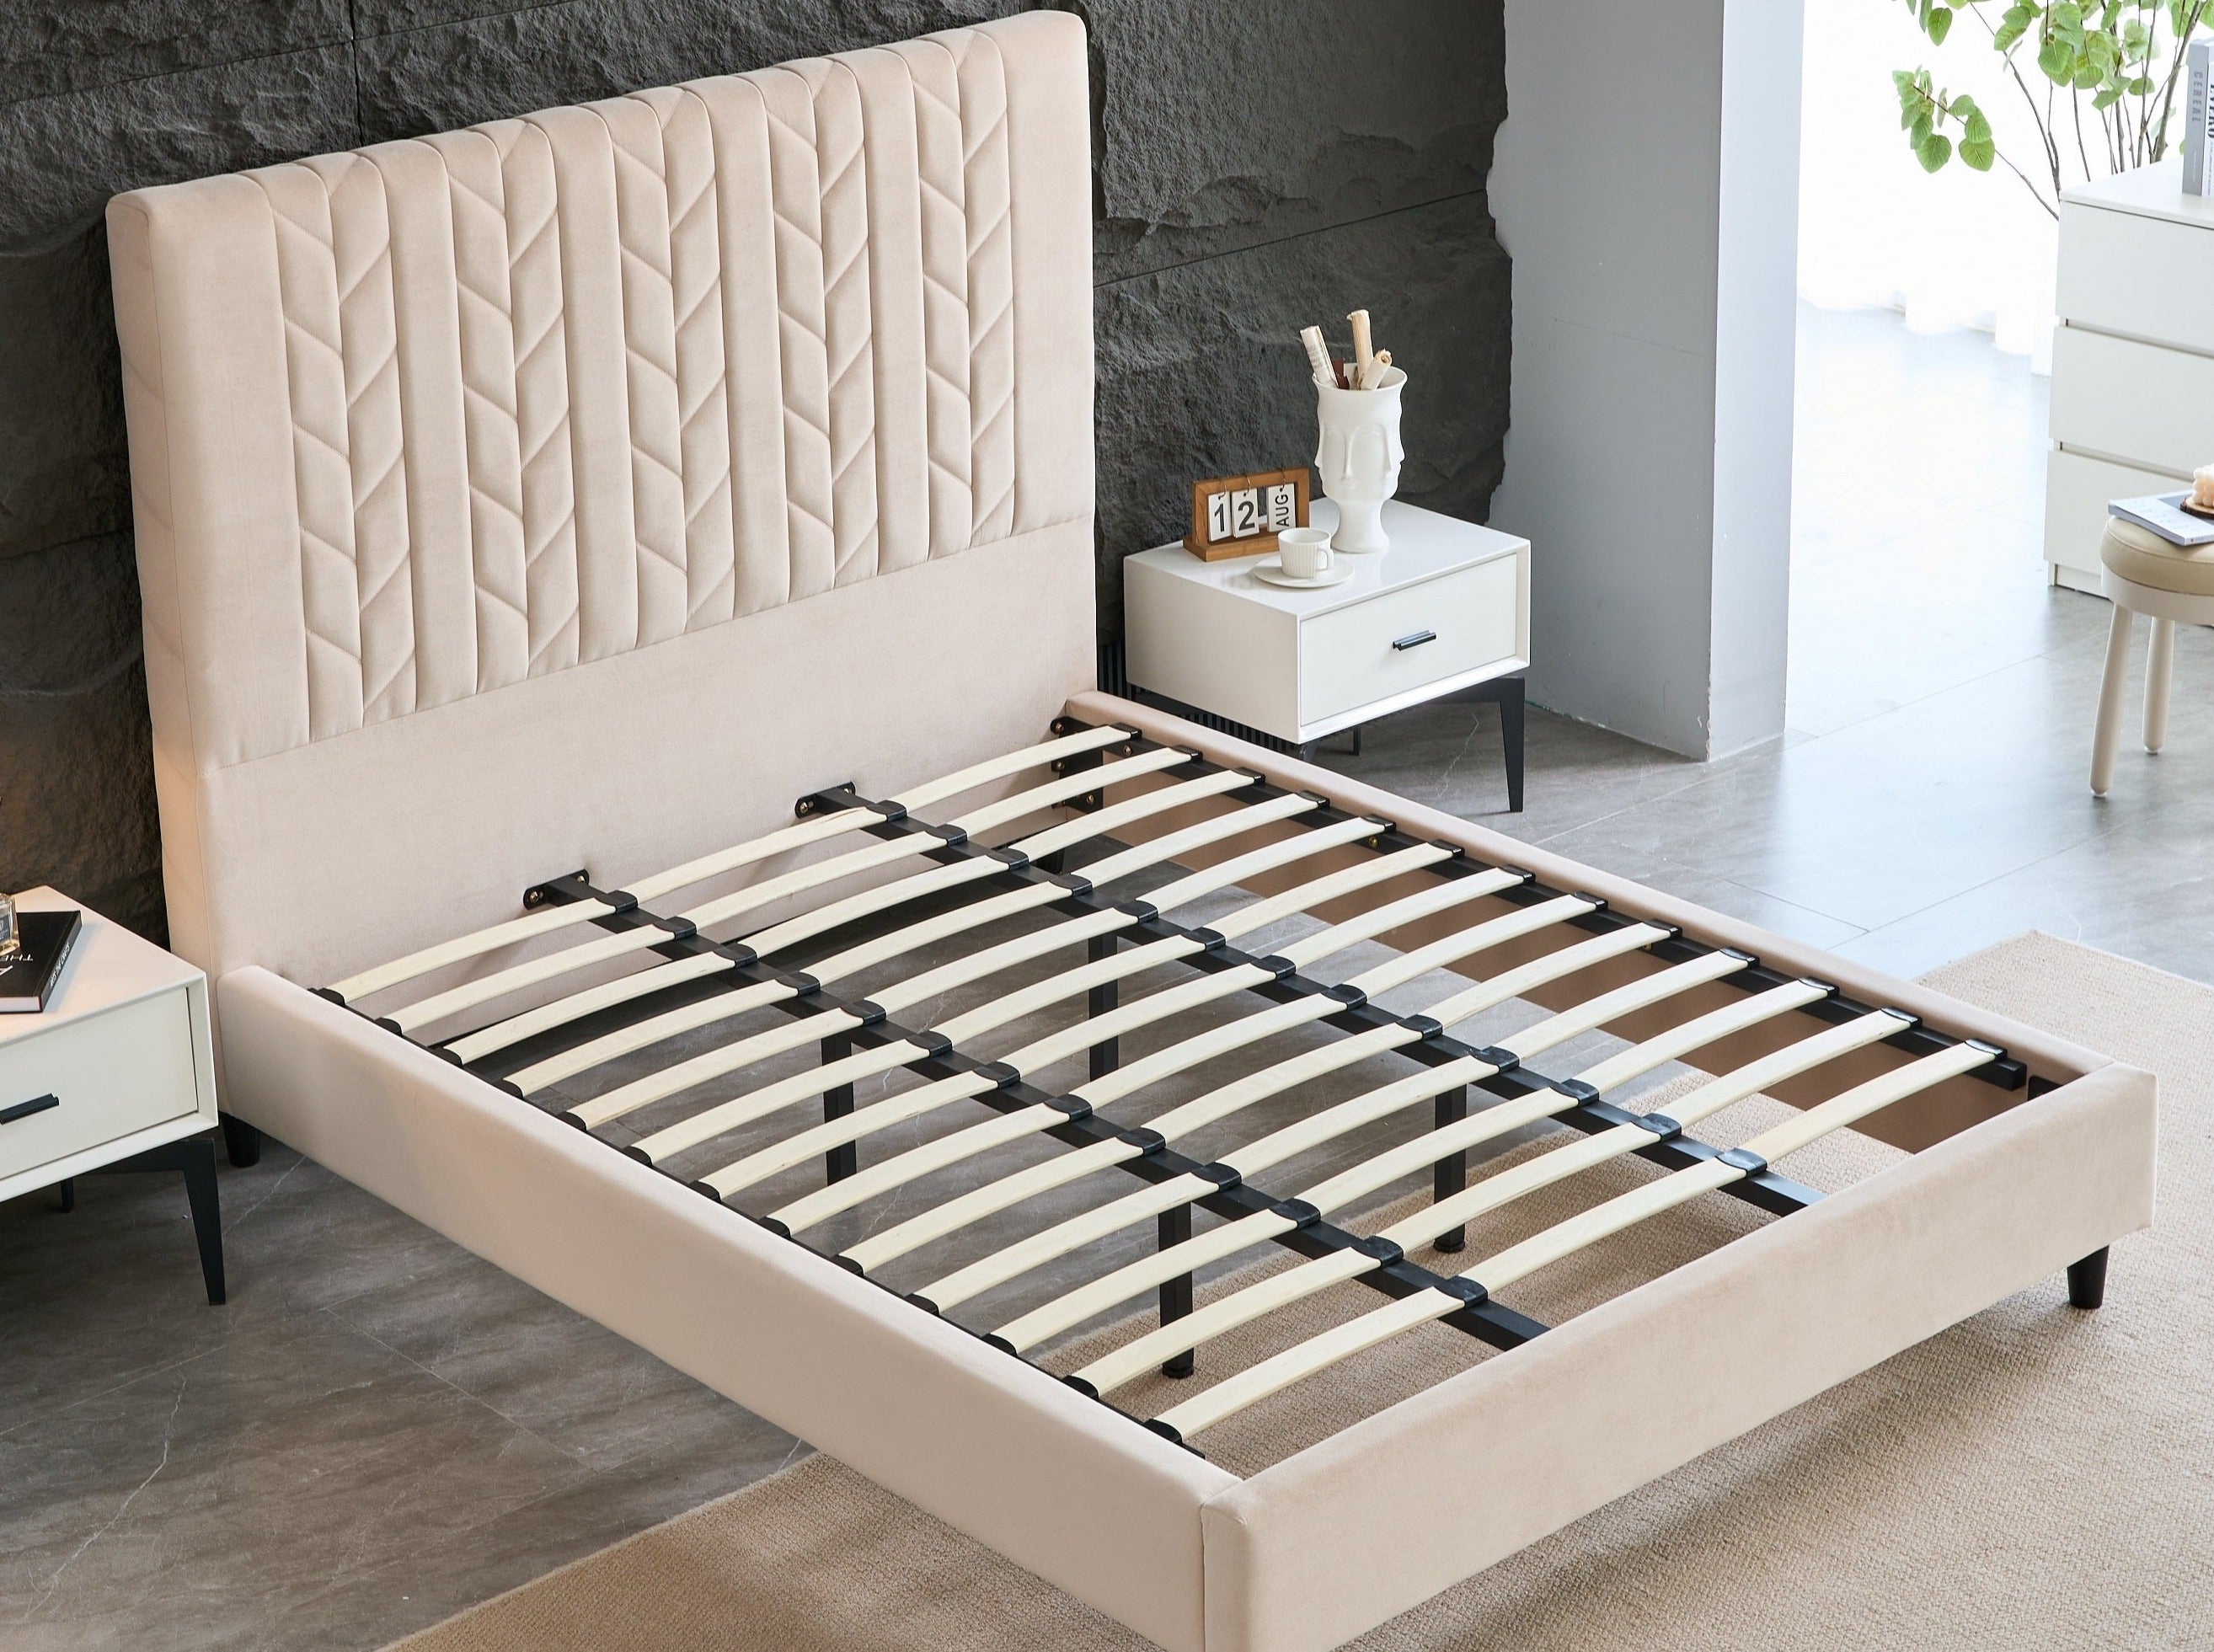 Panax Bed Frame with headboard